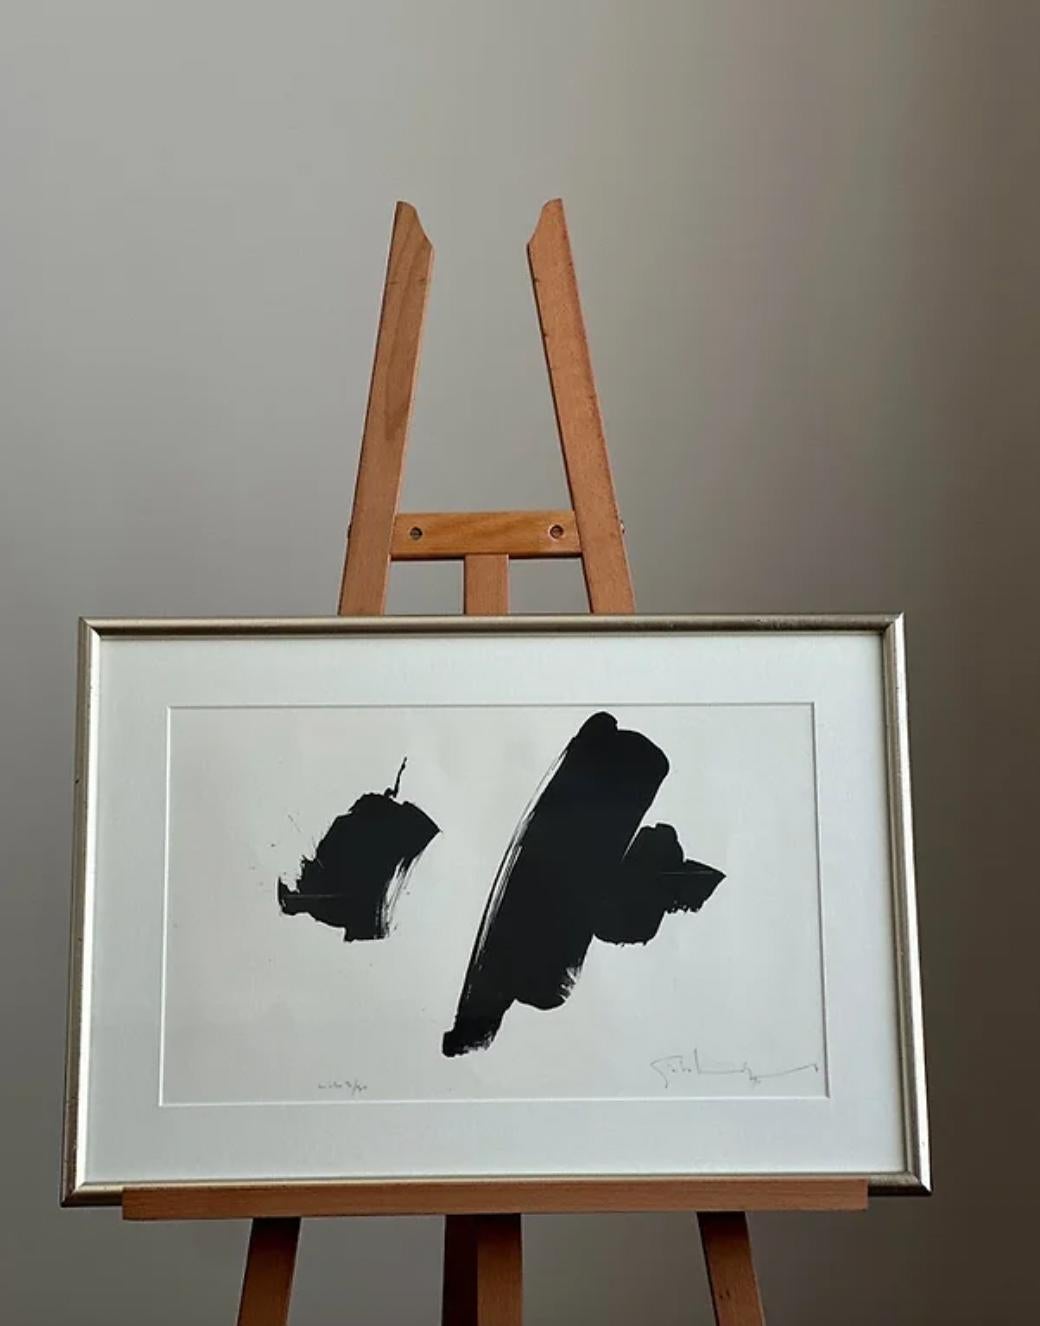 Paper Framed Monochrome Lithograph By Gösta Lindqvist, Signed, Numbered 3/30 For Sale